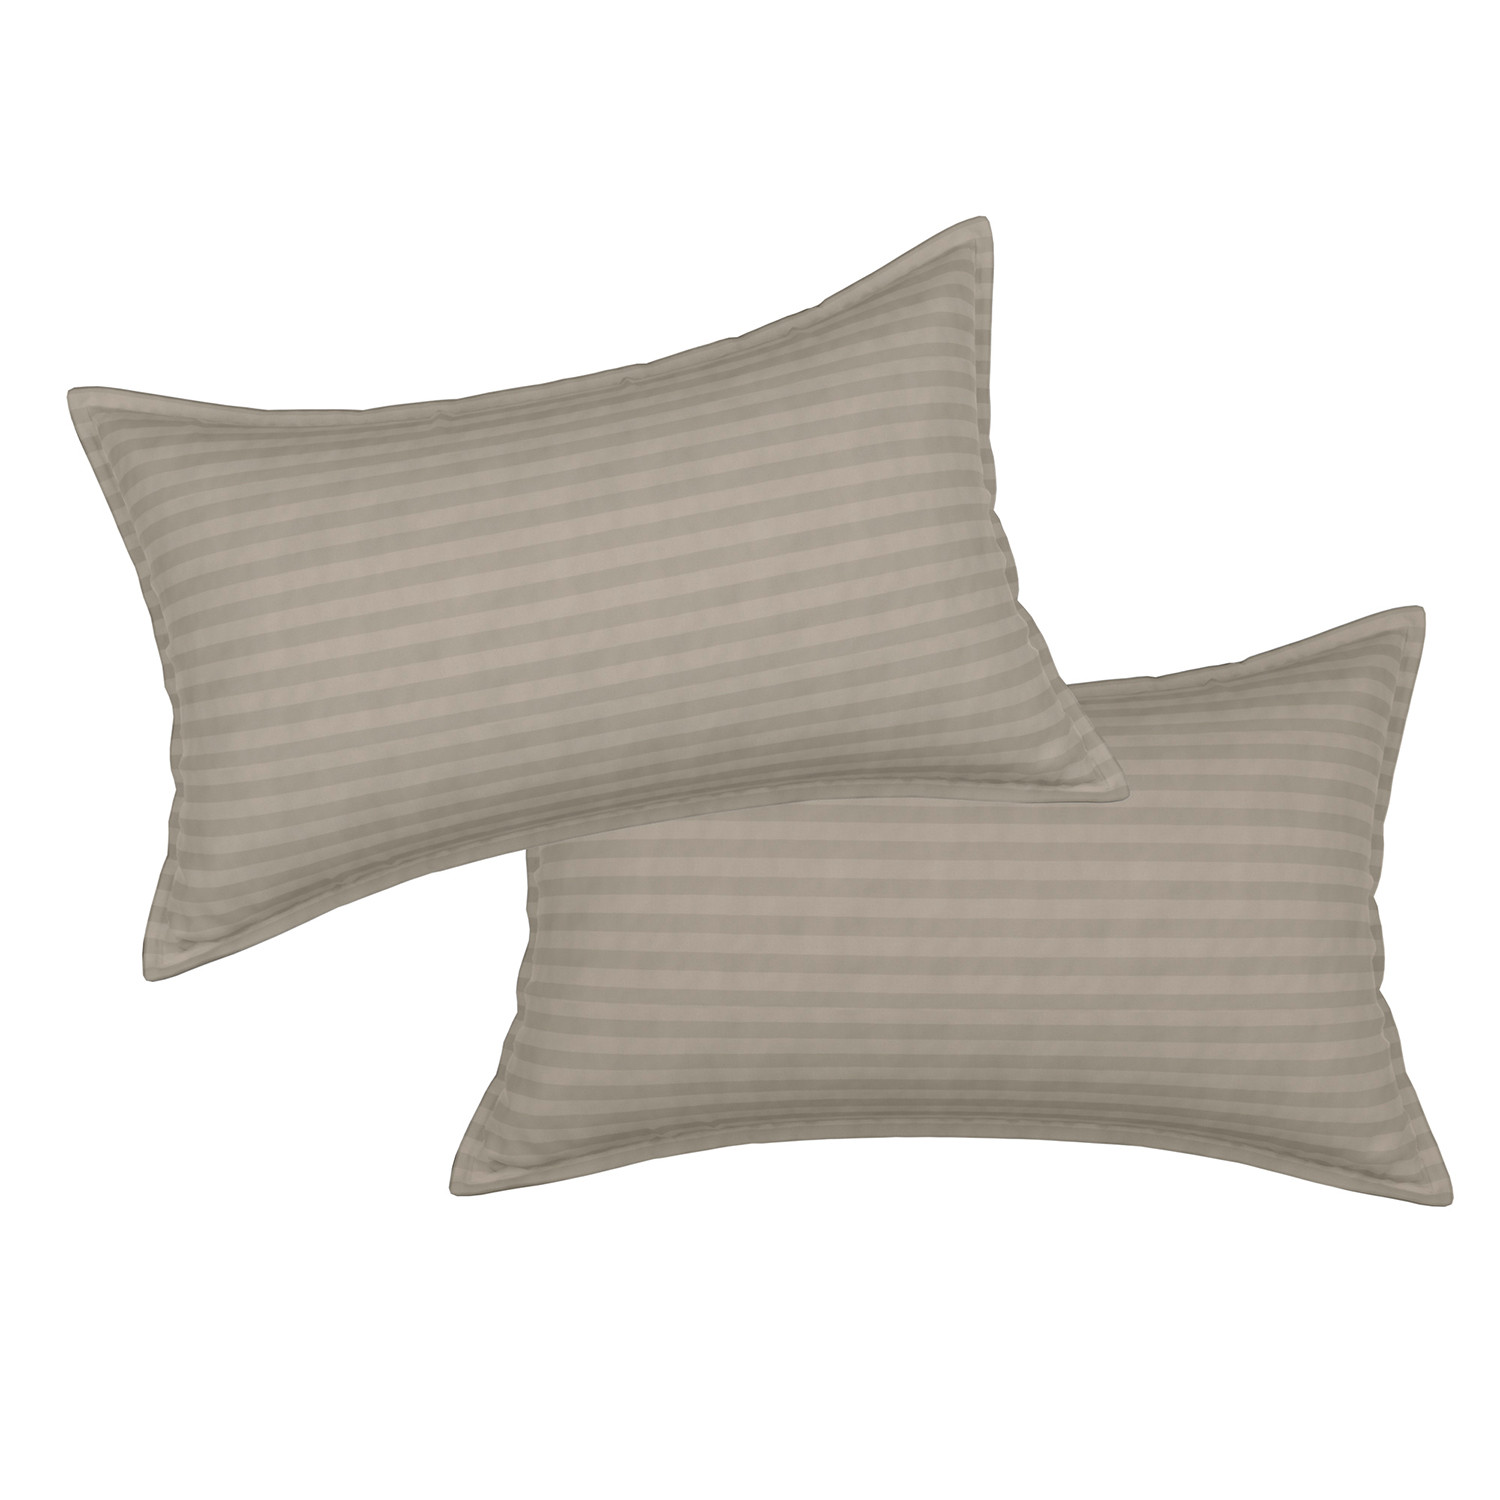 Kuber Industries Pillow Cover | Cotton Pillow Cover | Striped Pattern Pillow Cover | Soft Pillow Cover for Home | Pillow Cover for Bedroom | Cream